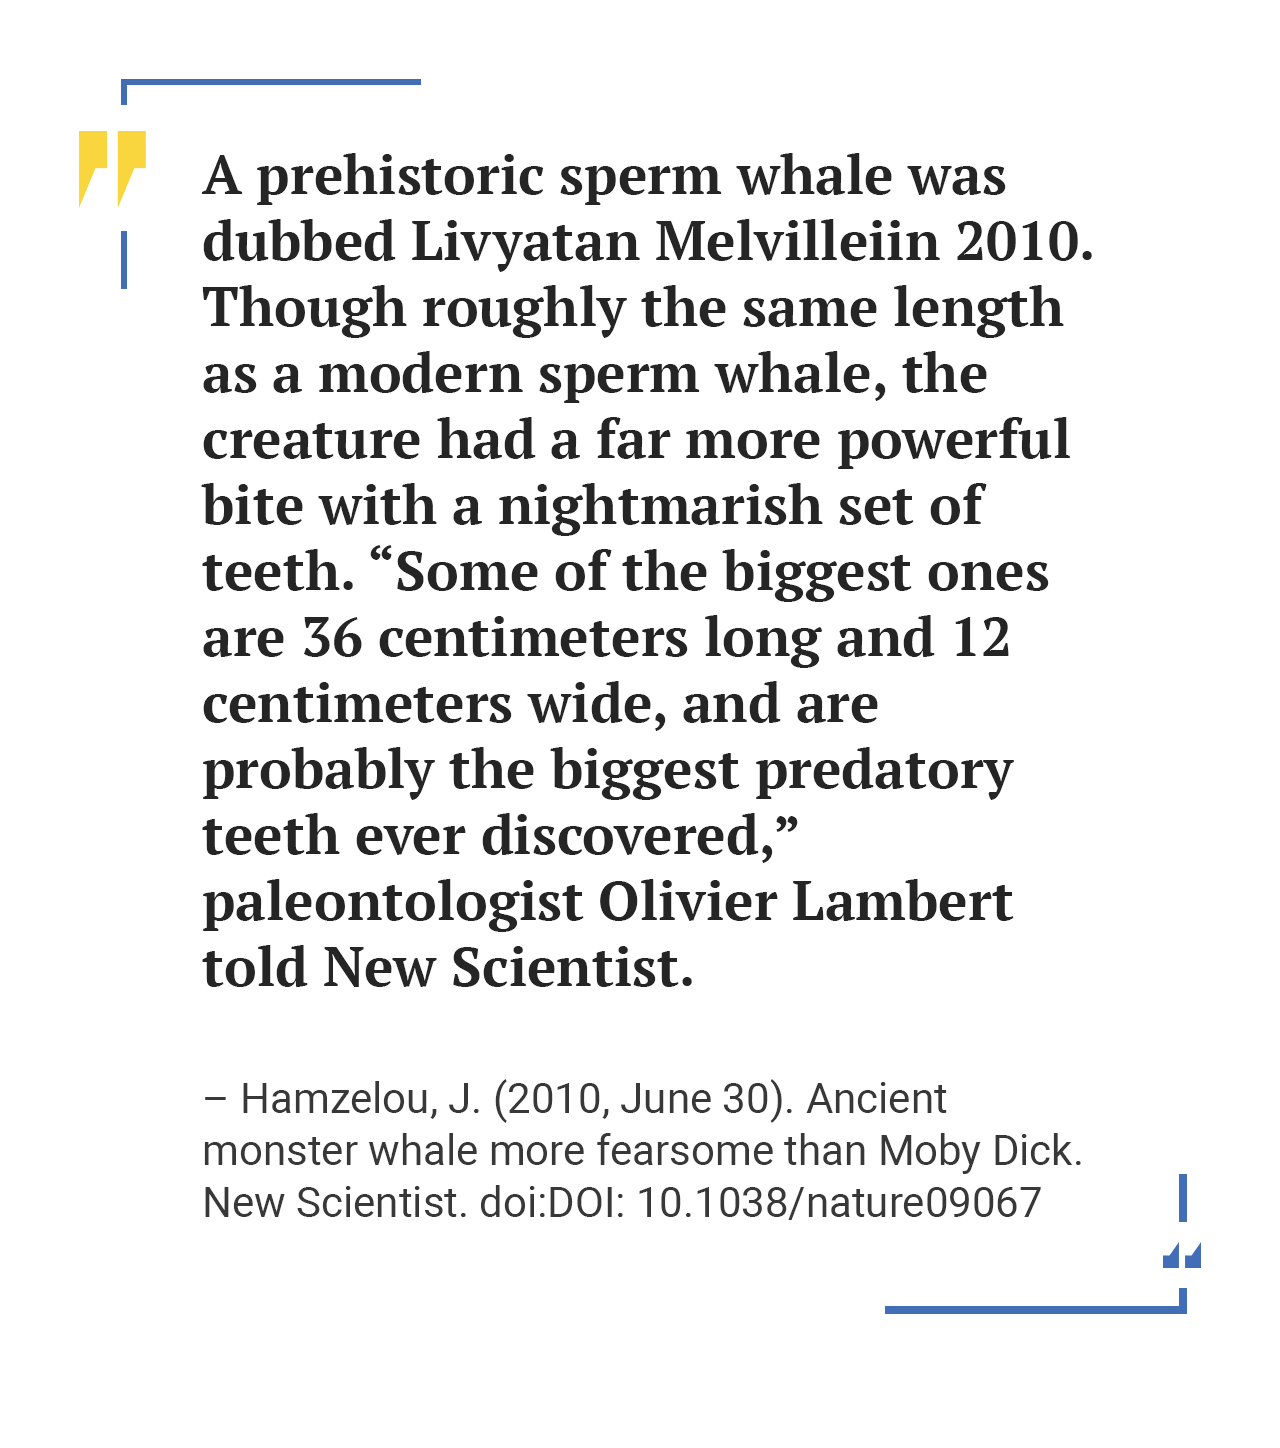 Hamzelou, J. (2010, June 30). Ancient monster whale more fearsome than Moby Dick.